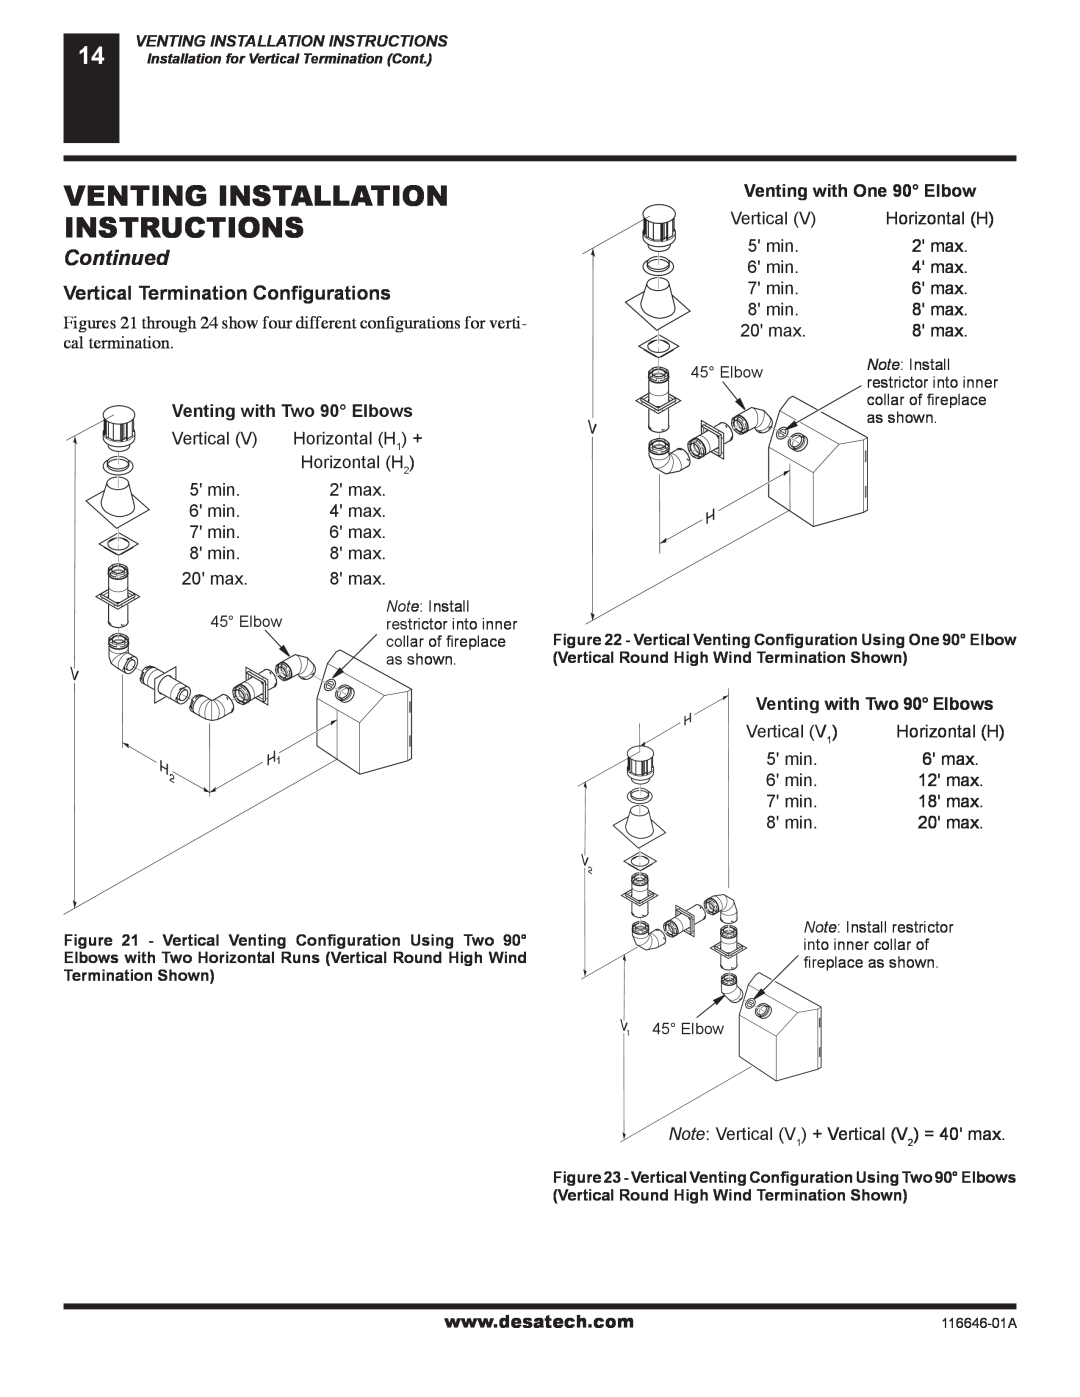 Desa CGDV32NR Venting Installation Instructions, Continued, Vertical Termination Conﬁgurations, Venting with Two 90 Elbows 